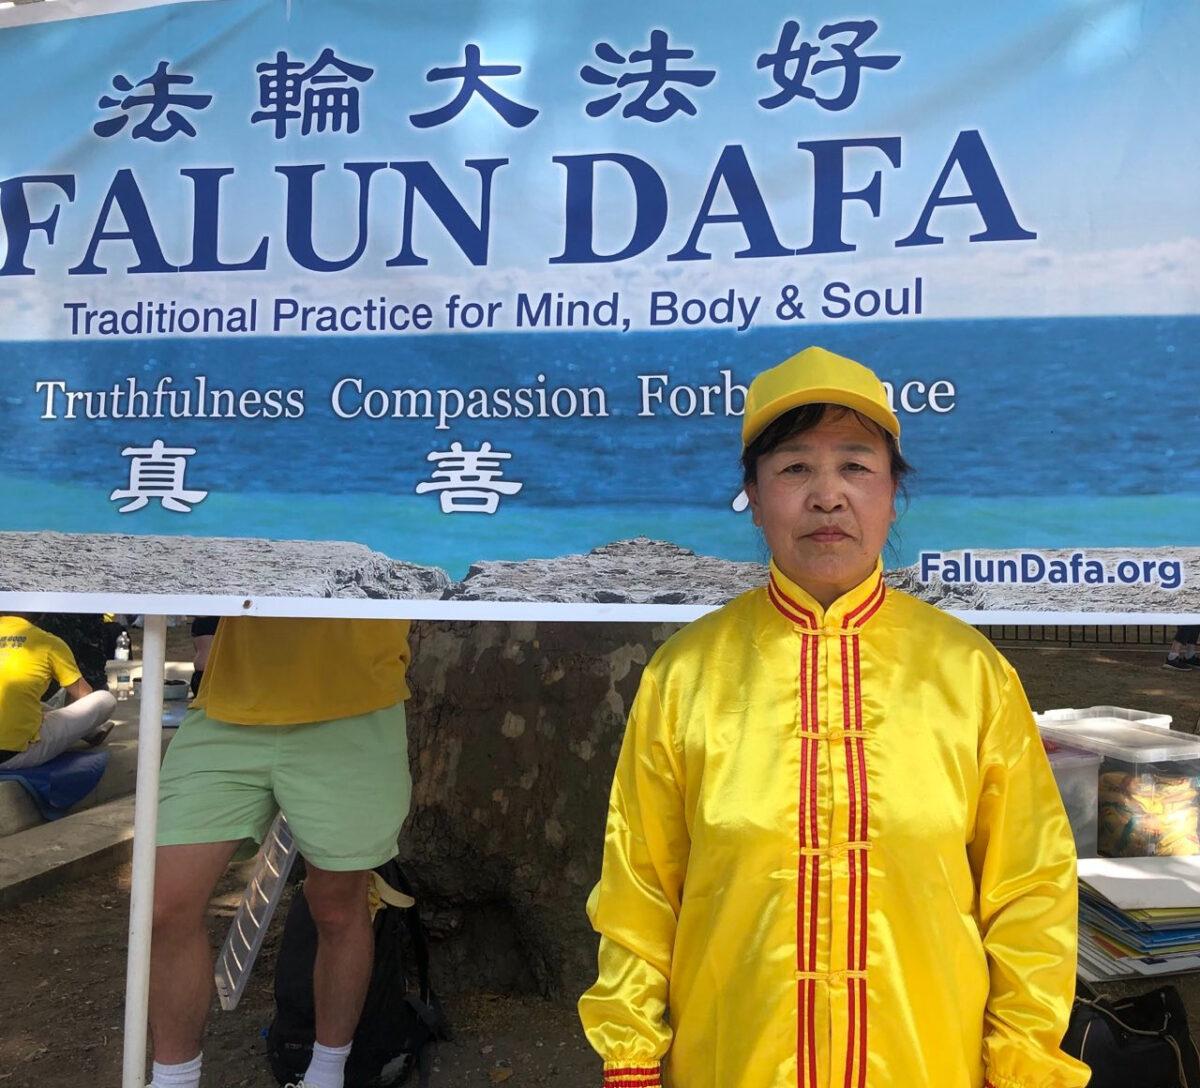 Falun Gong practitioner Yong Li at a rally highlighting the 23rd year of persecution in China against the spiritual discipline, in London on July 16, 2022. (Jack Sun/The Epoch Times)